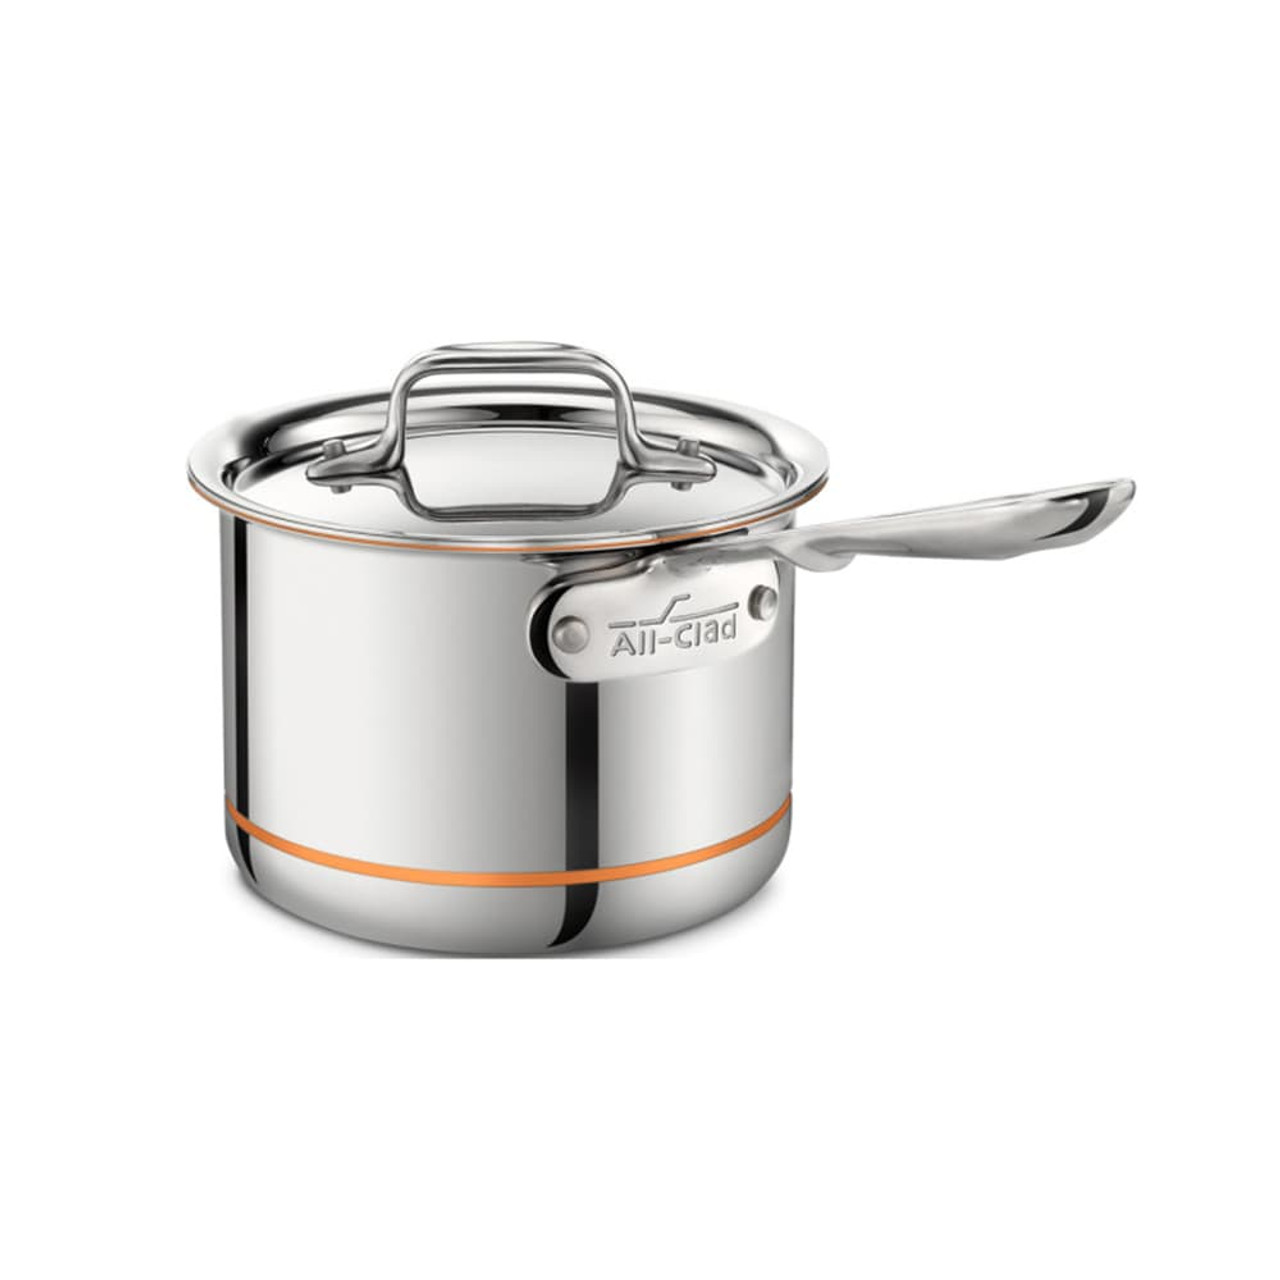 https://cdn11.bigcommerce.com/s-hccytny0od/images/stencil/1280x1280/products/512/1952/all-clad-copper-core-sauce-pan-2qt__32138.1586211912.jpg?c=2?imbypass=on